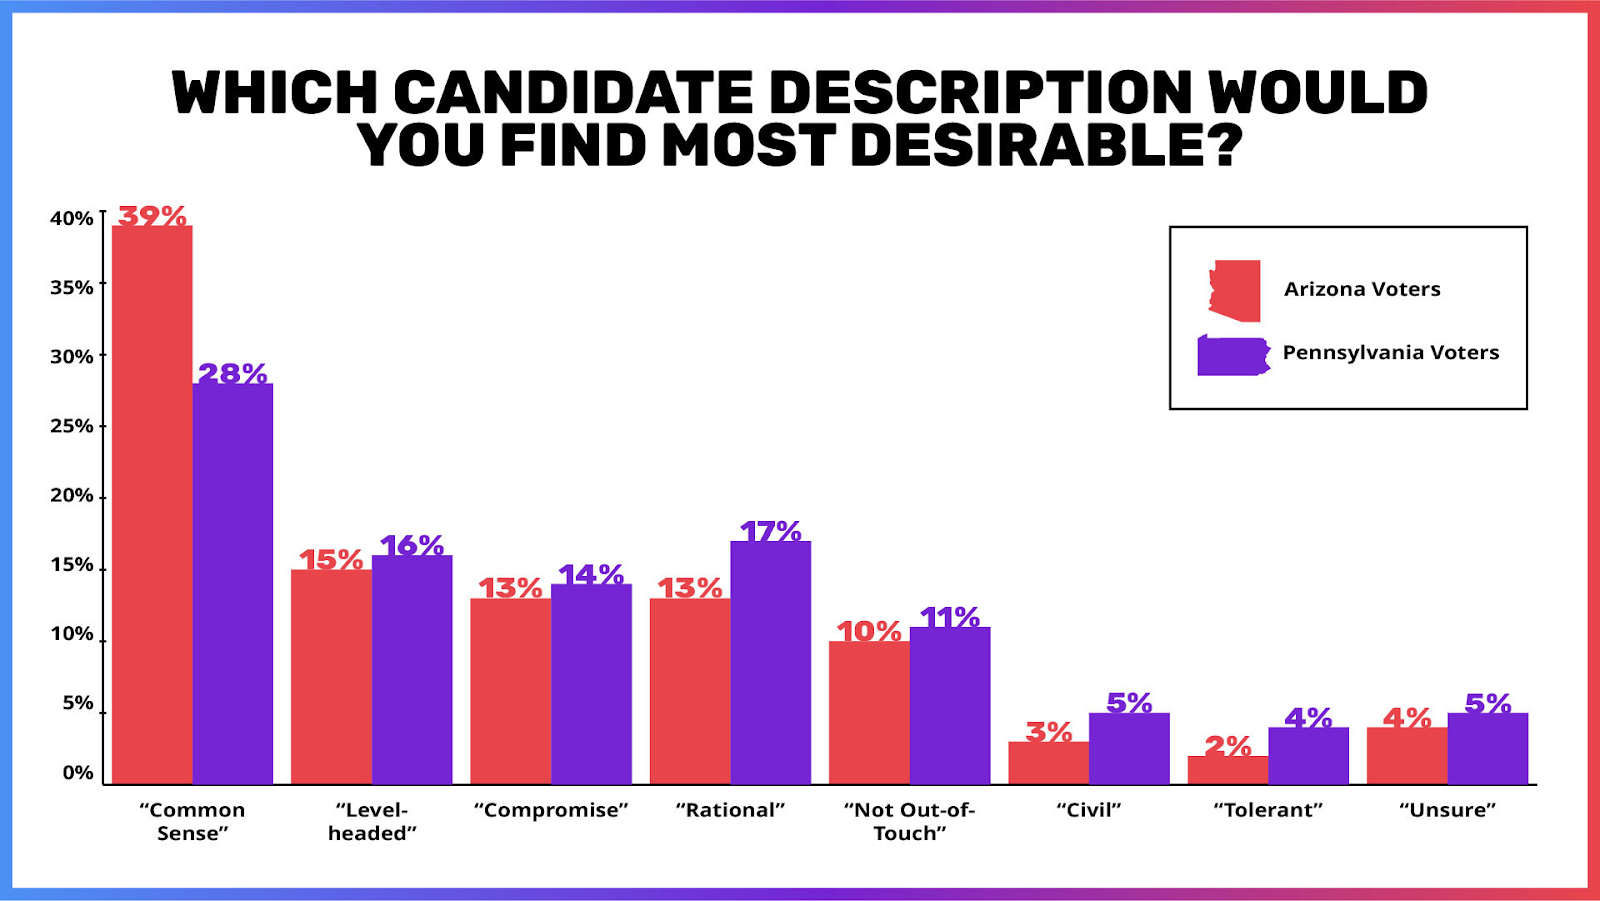 A bar graph showing the answer to the question "which candidate description would you find most desirable?"
Among both Arizona and Pennsylvania voters a the top two Reponses are Common Sense and Level Headed.